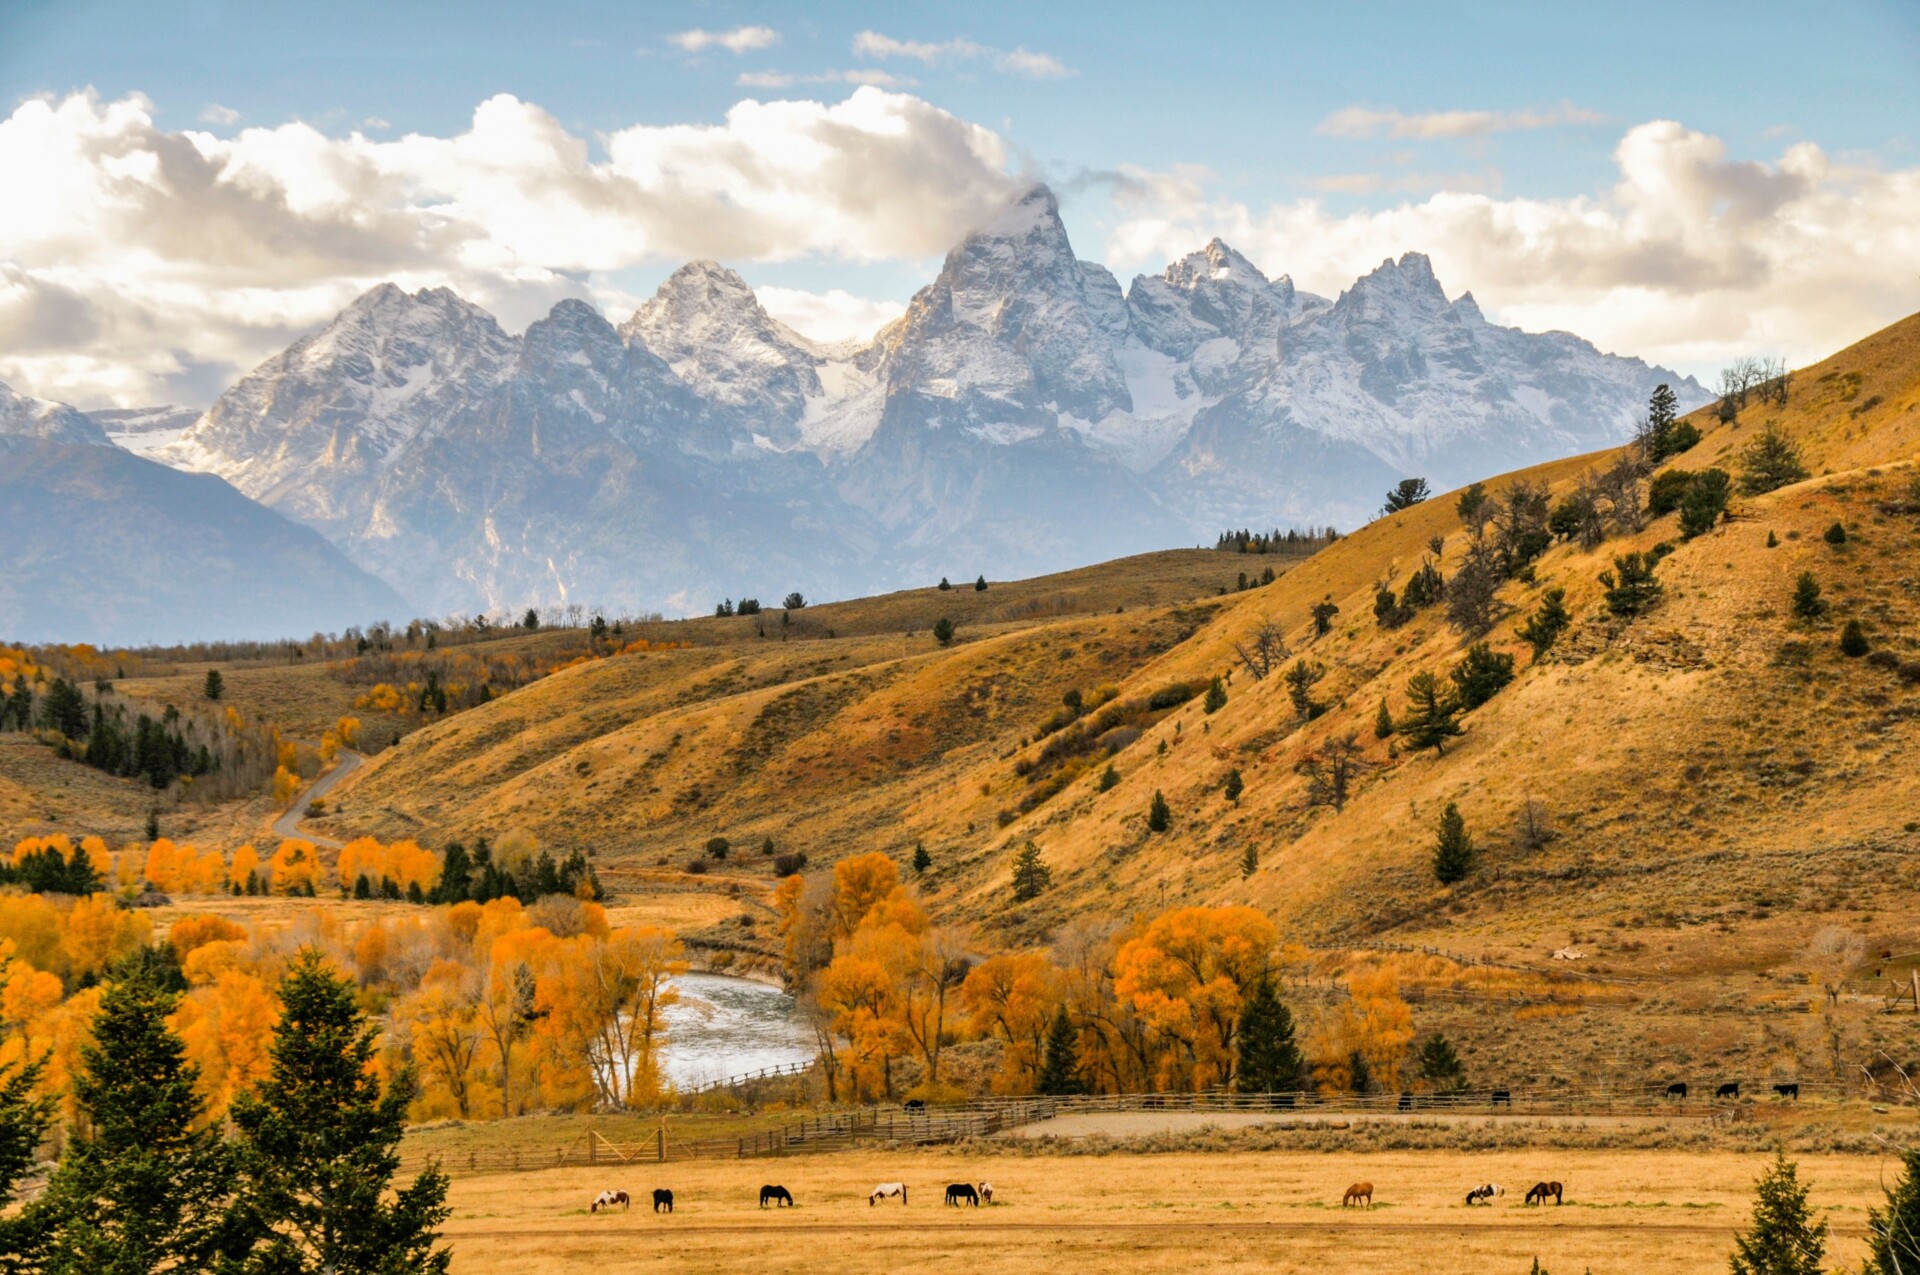 Autumn from the Gros Ventres - Stephen Williams Photography, Jackson Wyoming